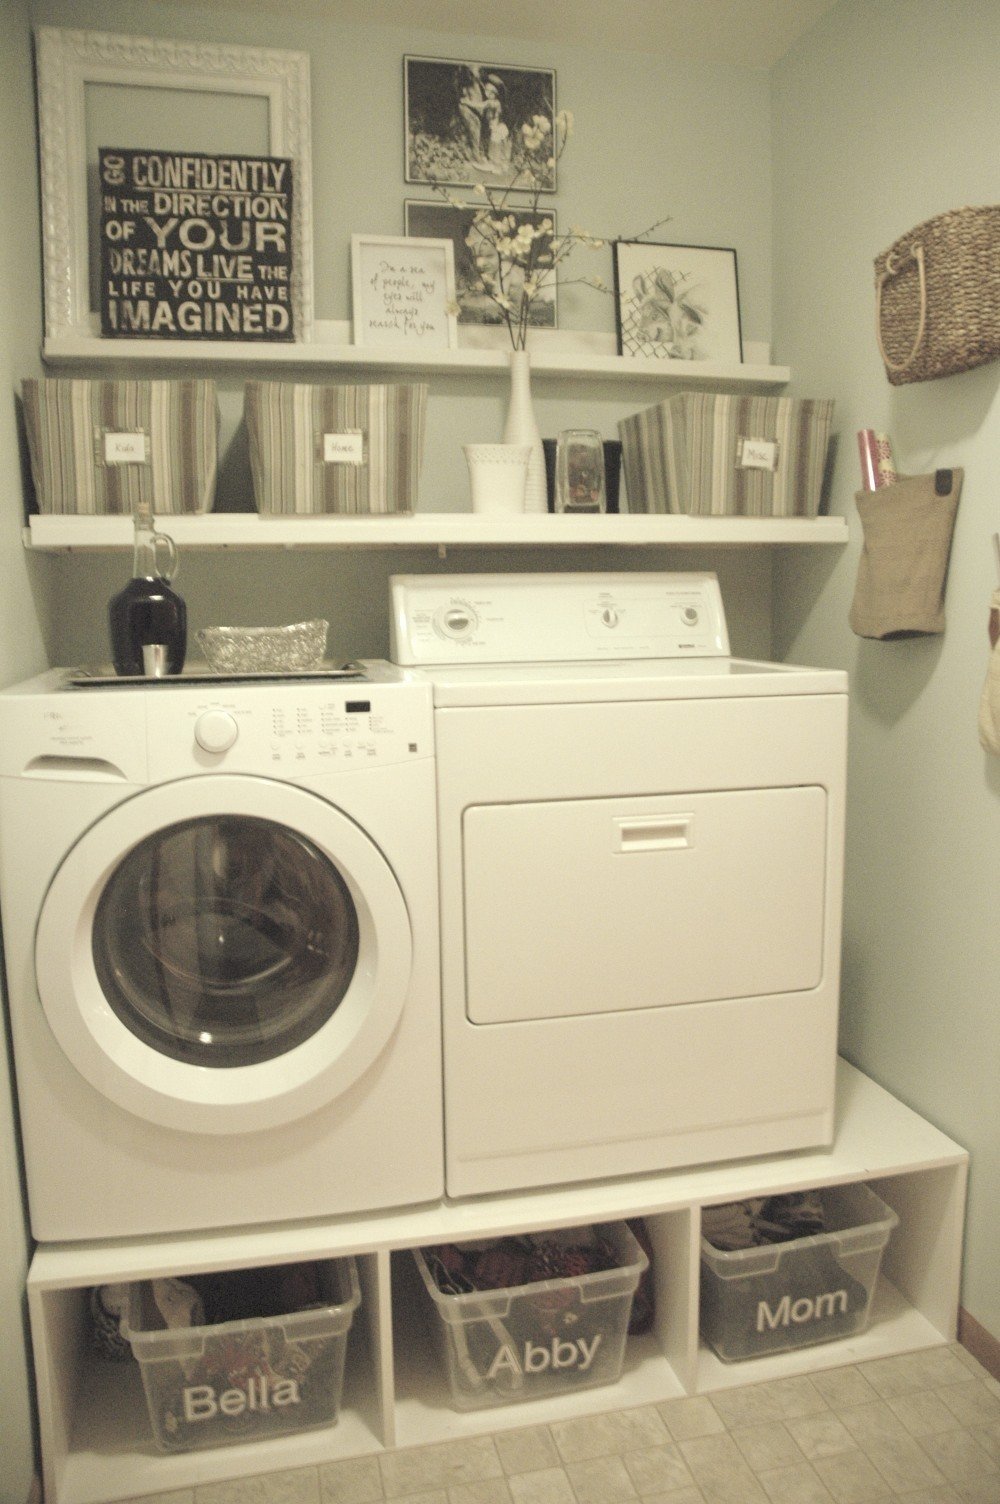 10 Unique Laundry Room Ideas Small Spaces laundry room ideas small space all in home decor ideas 2022